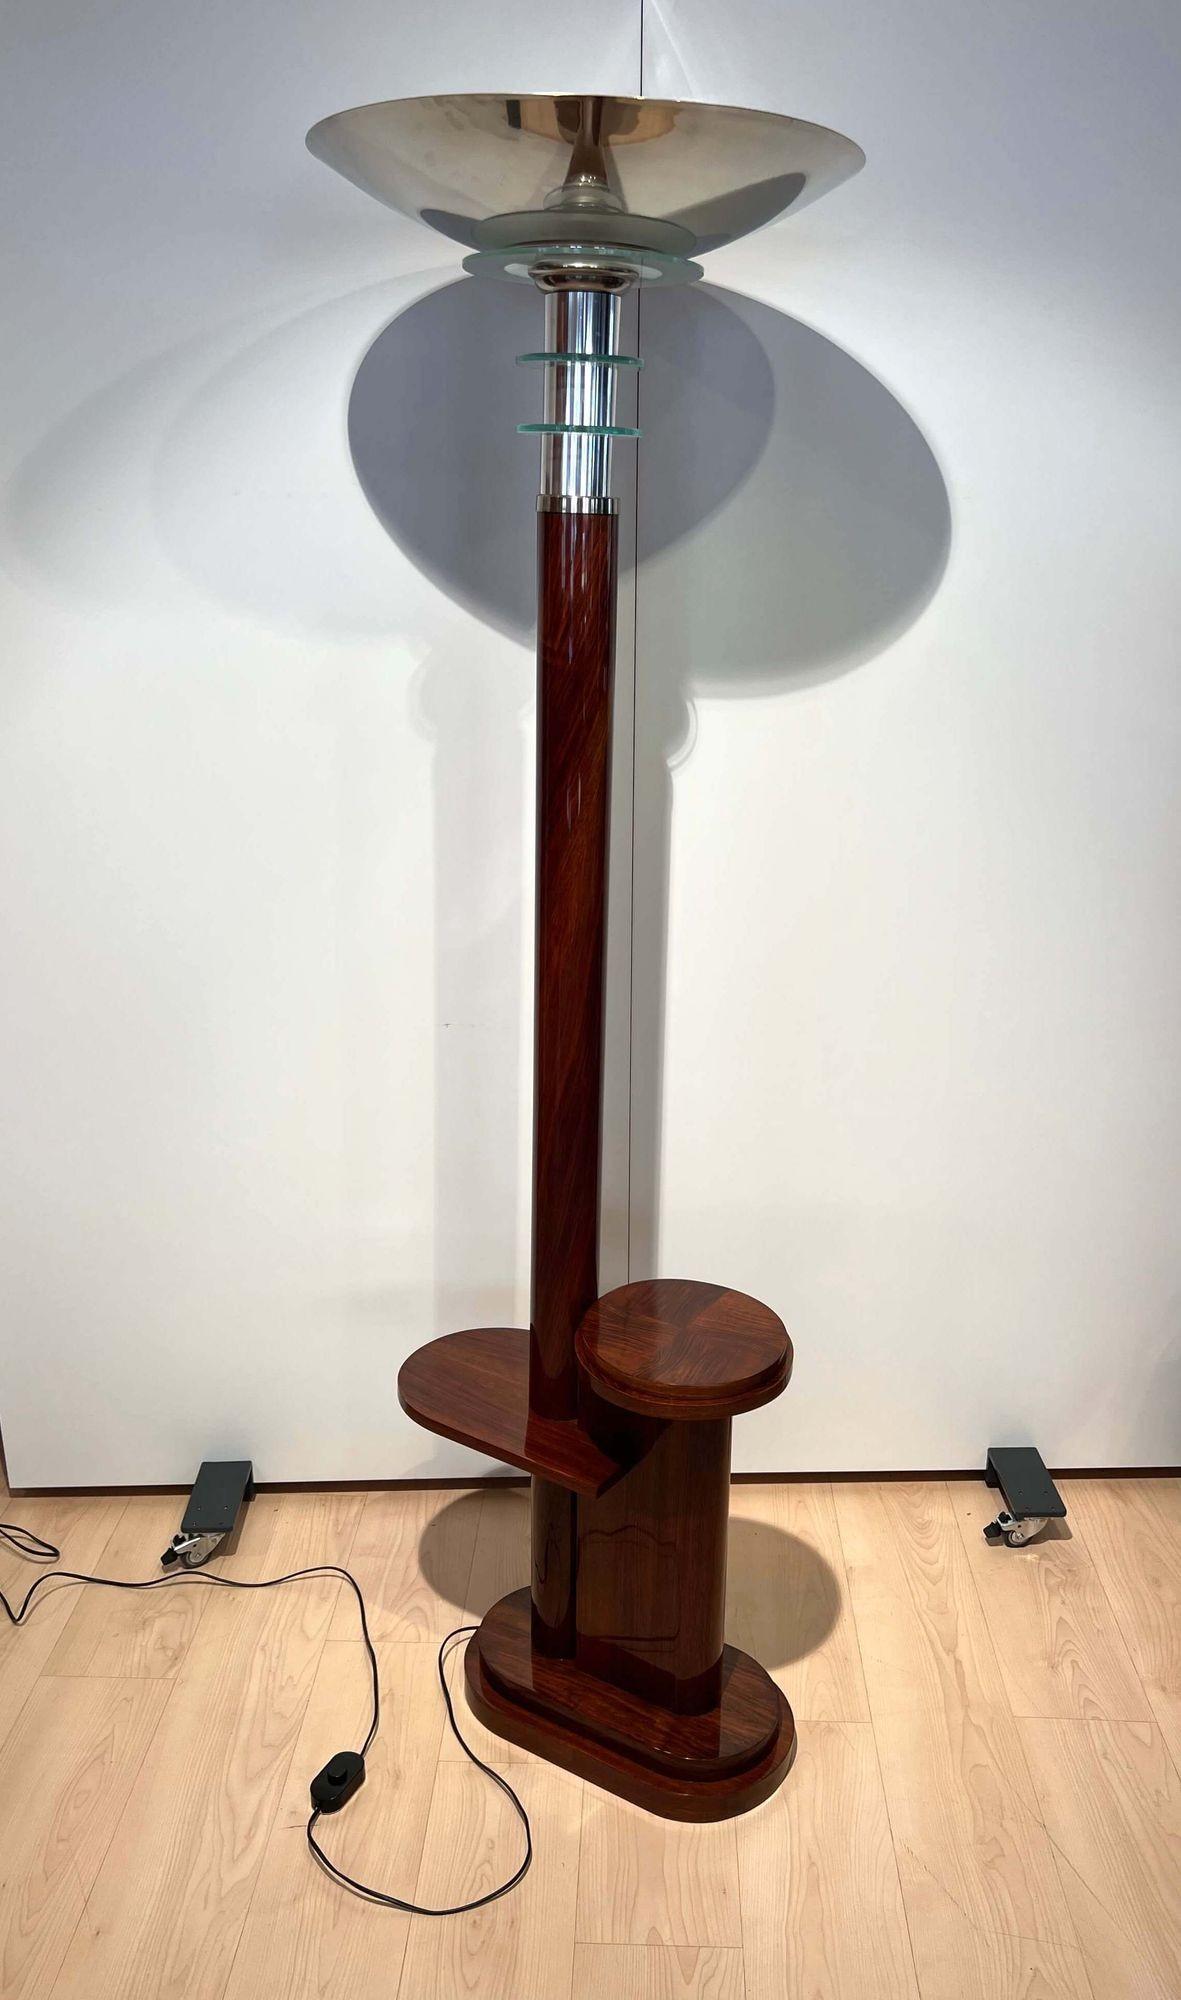 Art Deco Floor Lamp with Side Table, Walnut and Chrome, France, circa 1930 In Good Condition For Sale In Regensburg, DE